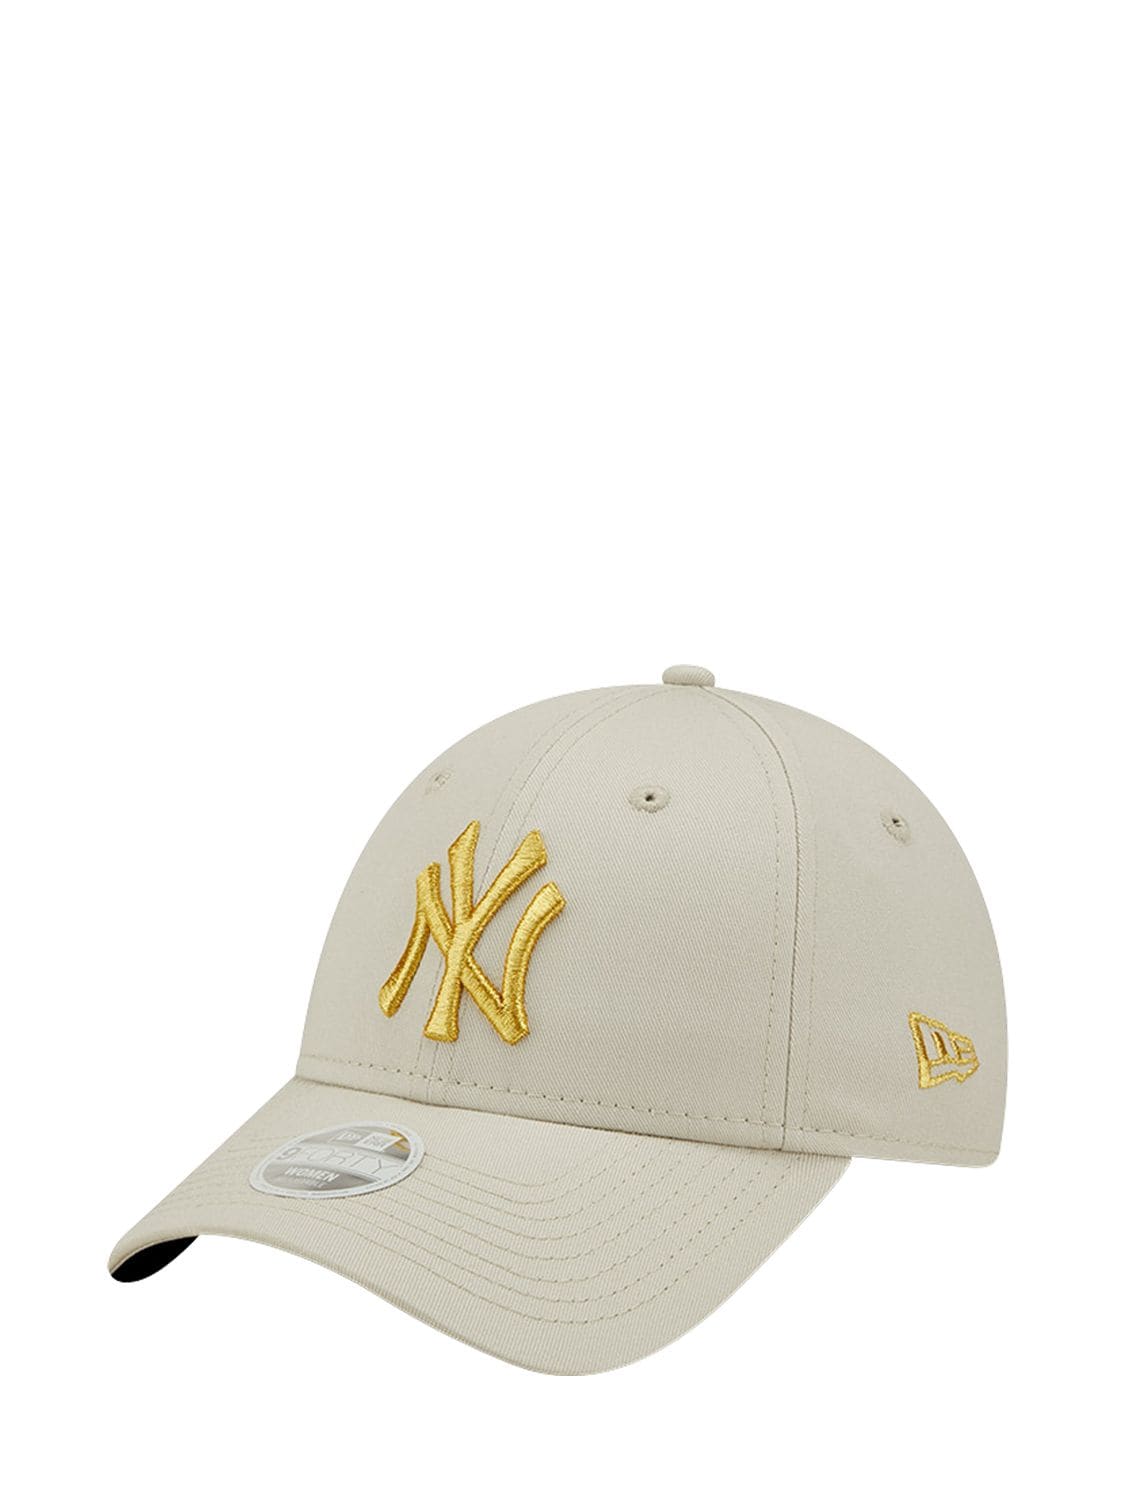 New Era 9Forty NY cap in beige